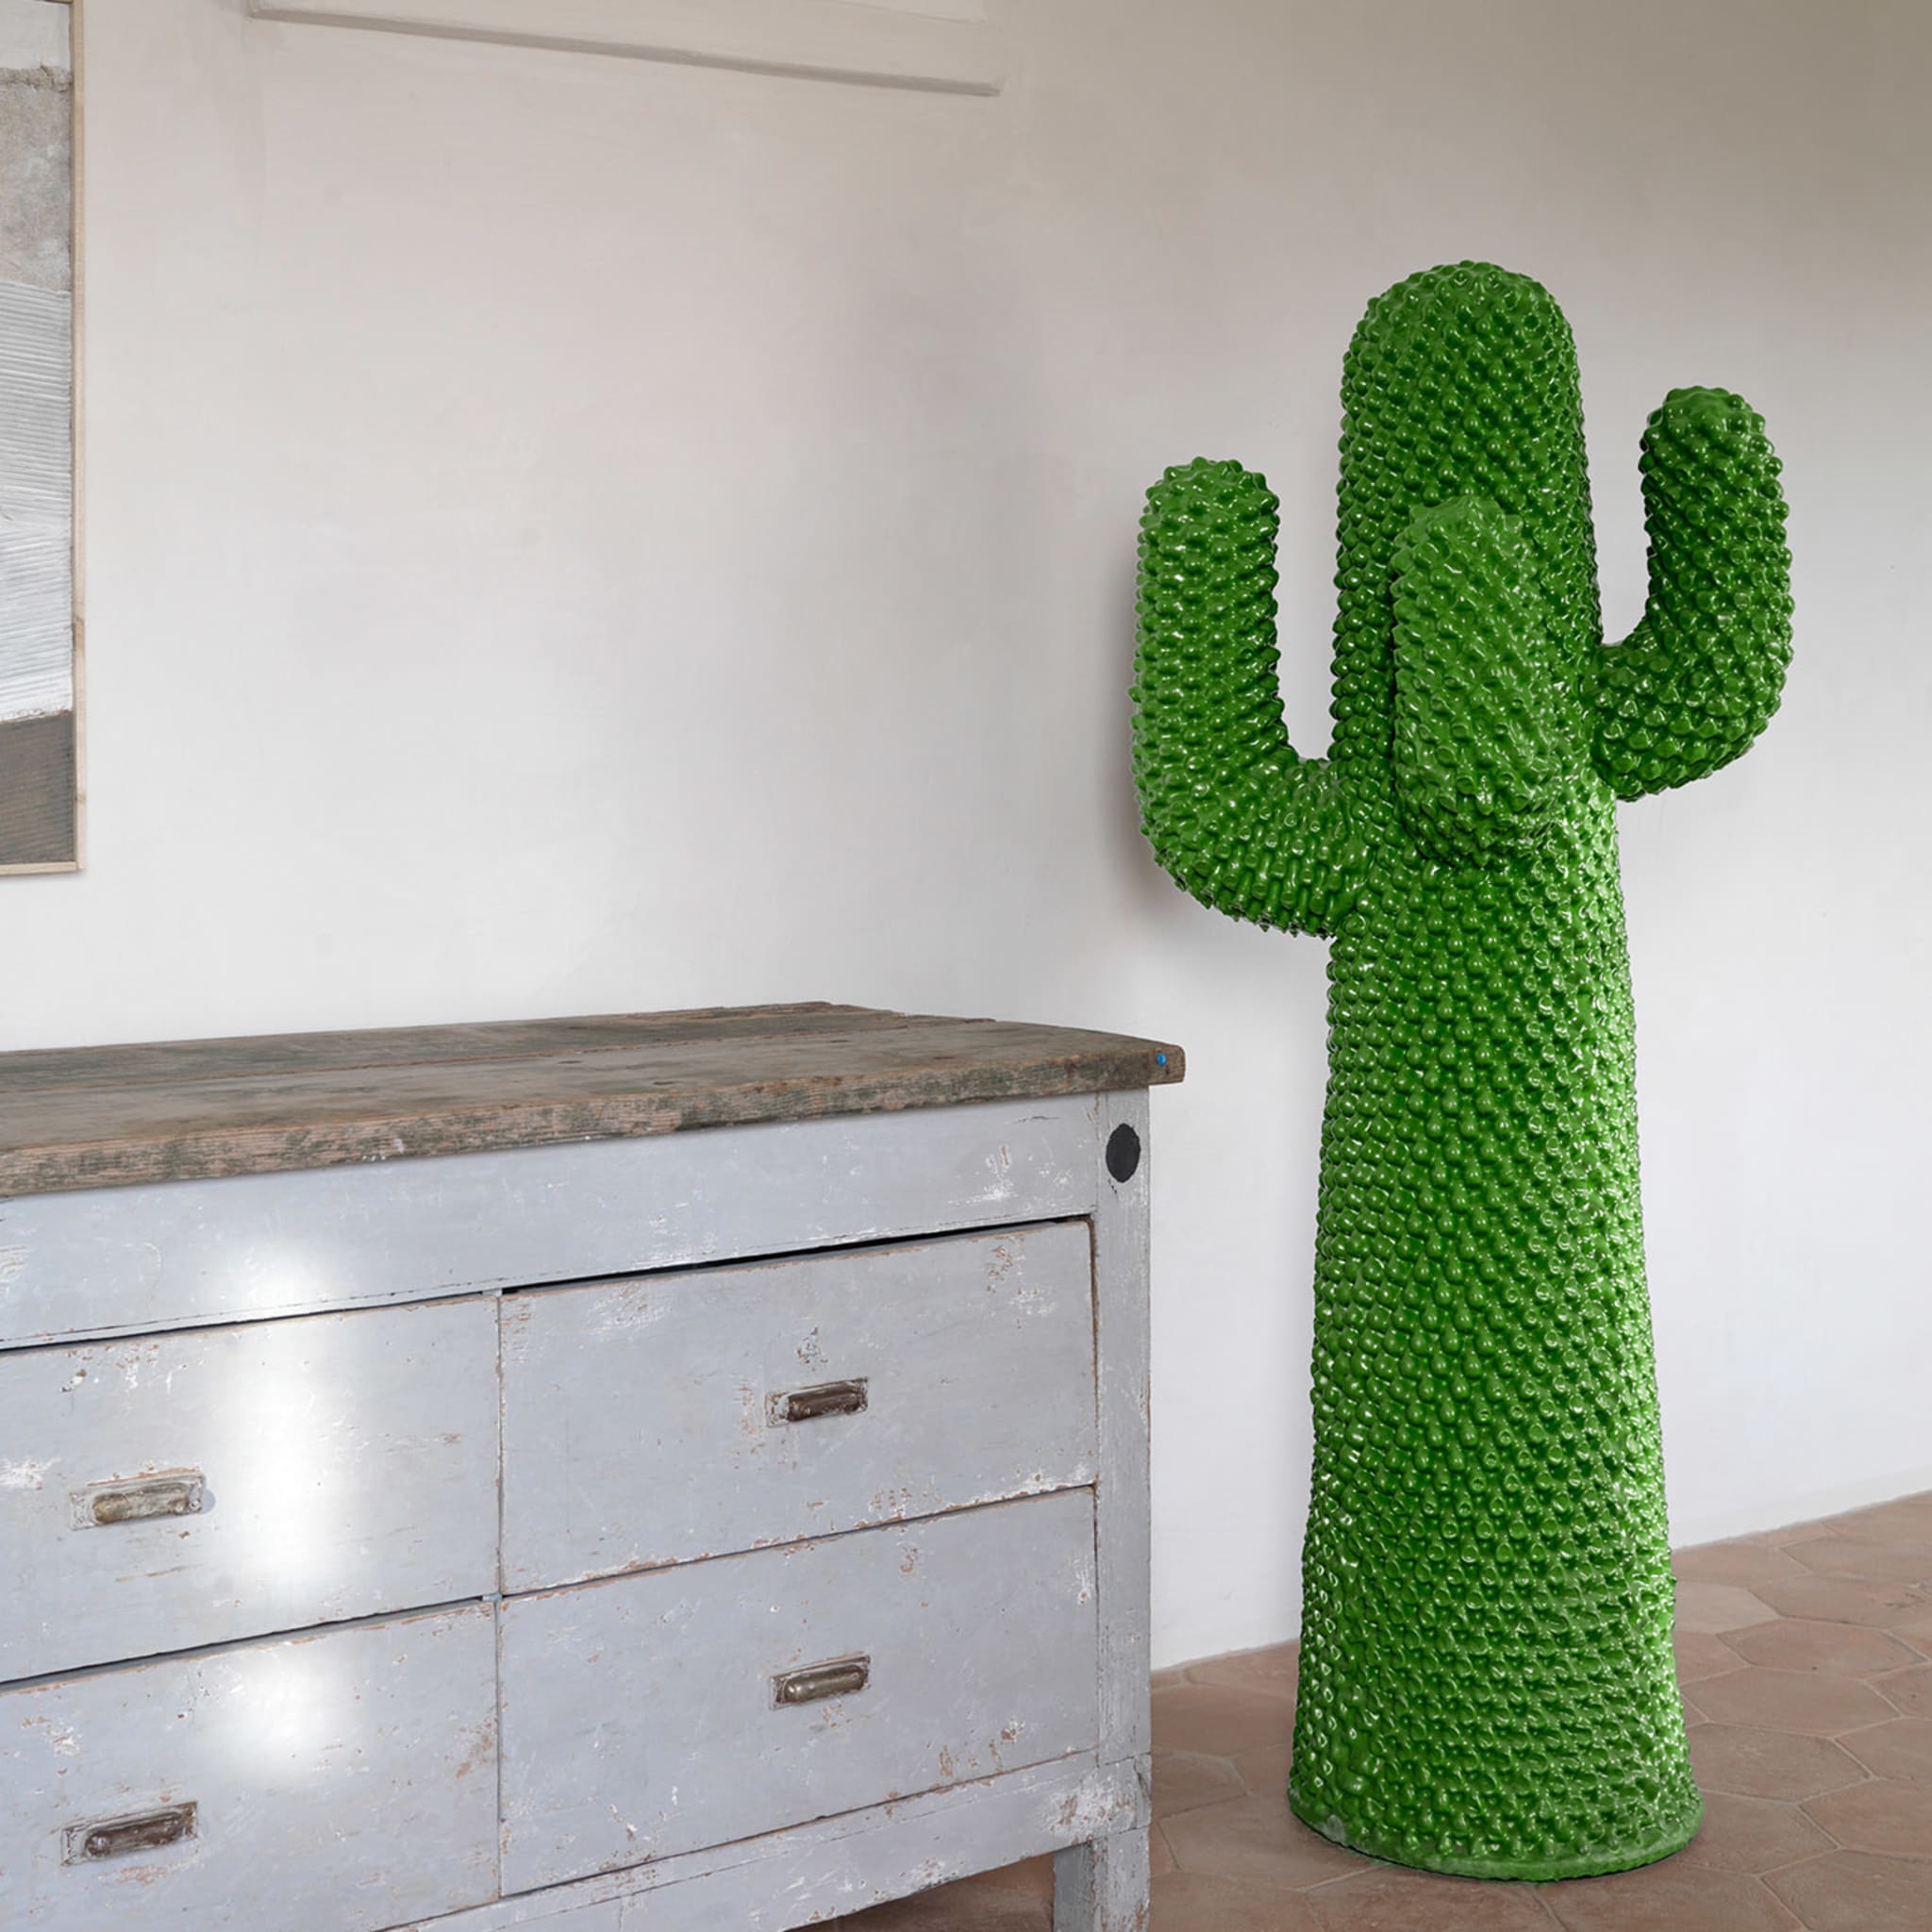 Another Green Cactus Coat Stand by Drocco/Mello - Alternative view 4